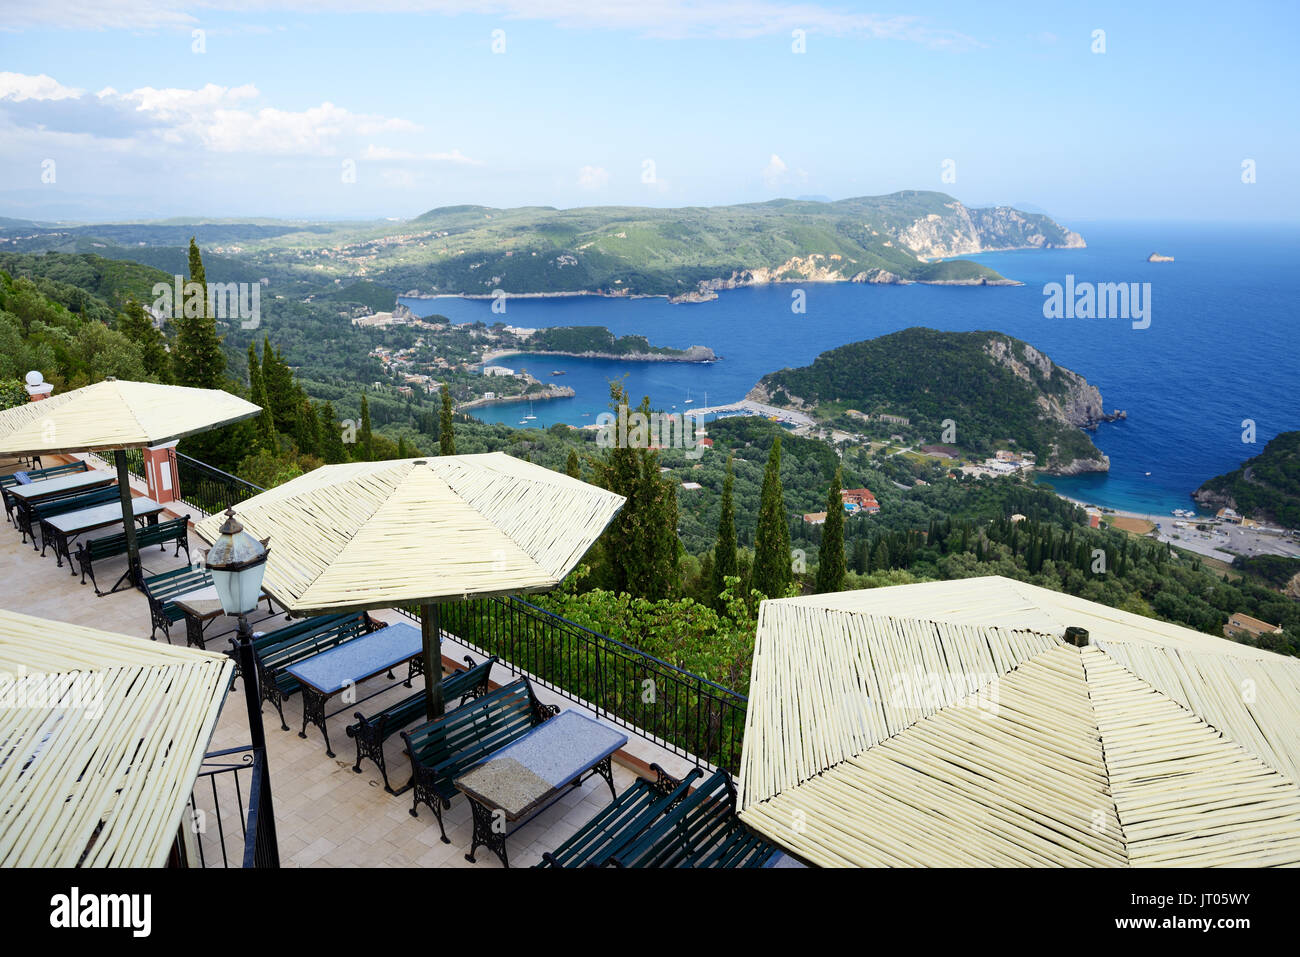 The view from restaurant on a bay in a heart shape and beach, Corfu, Greece Stock Photo